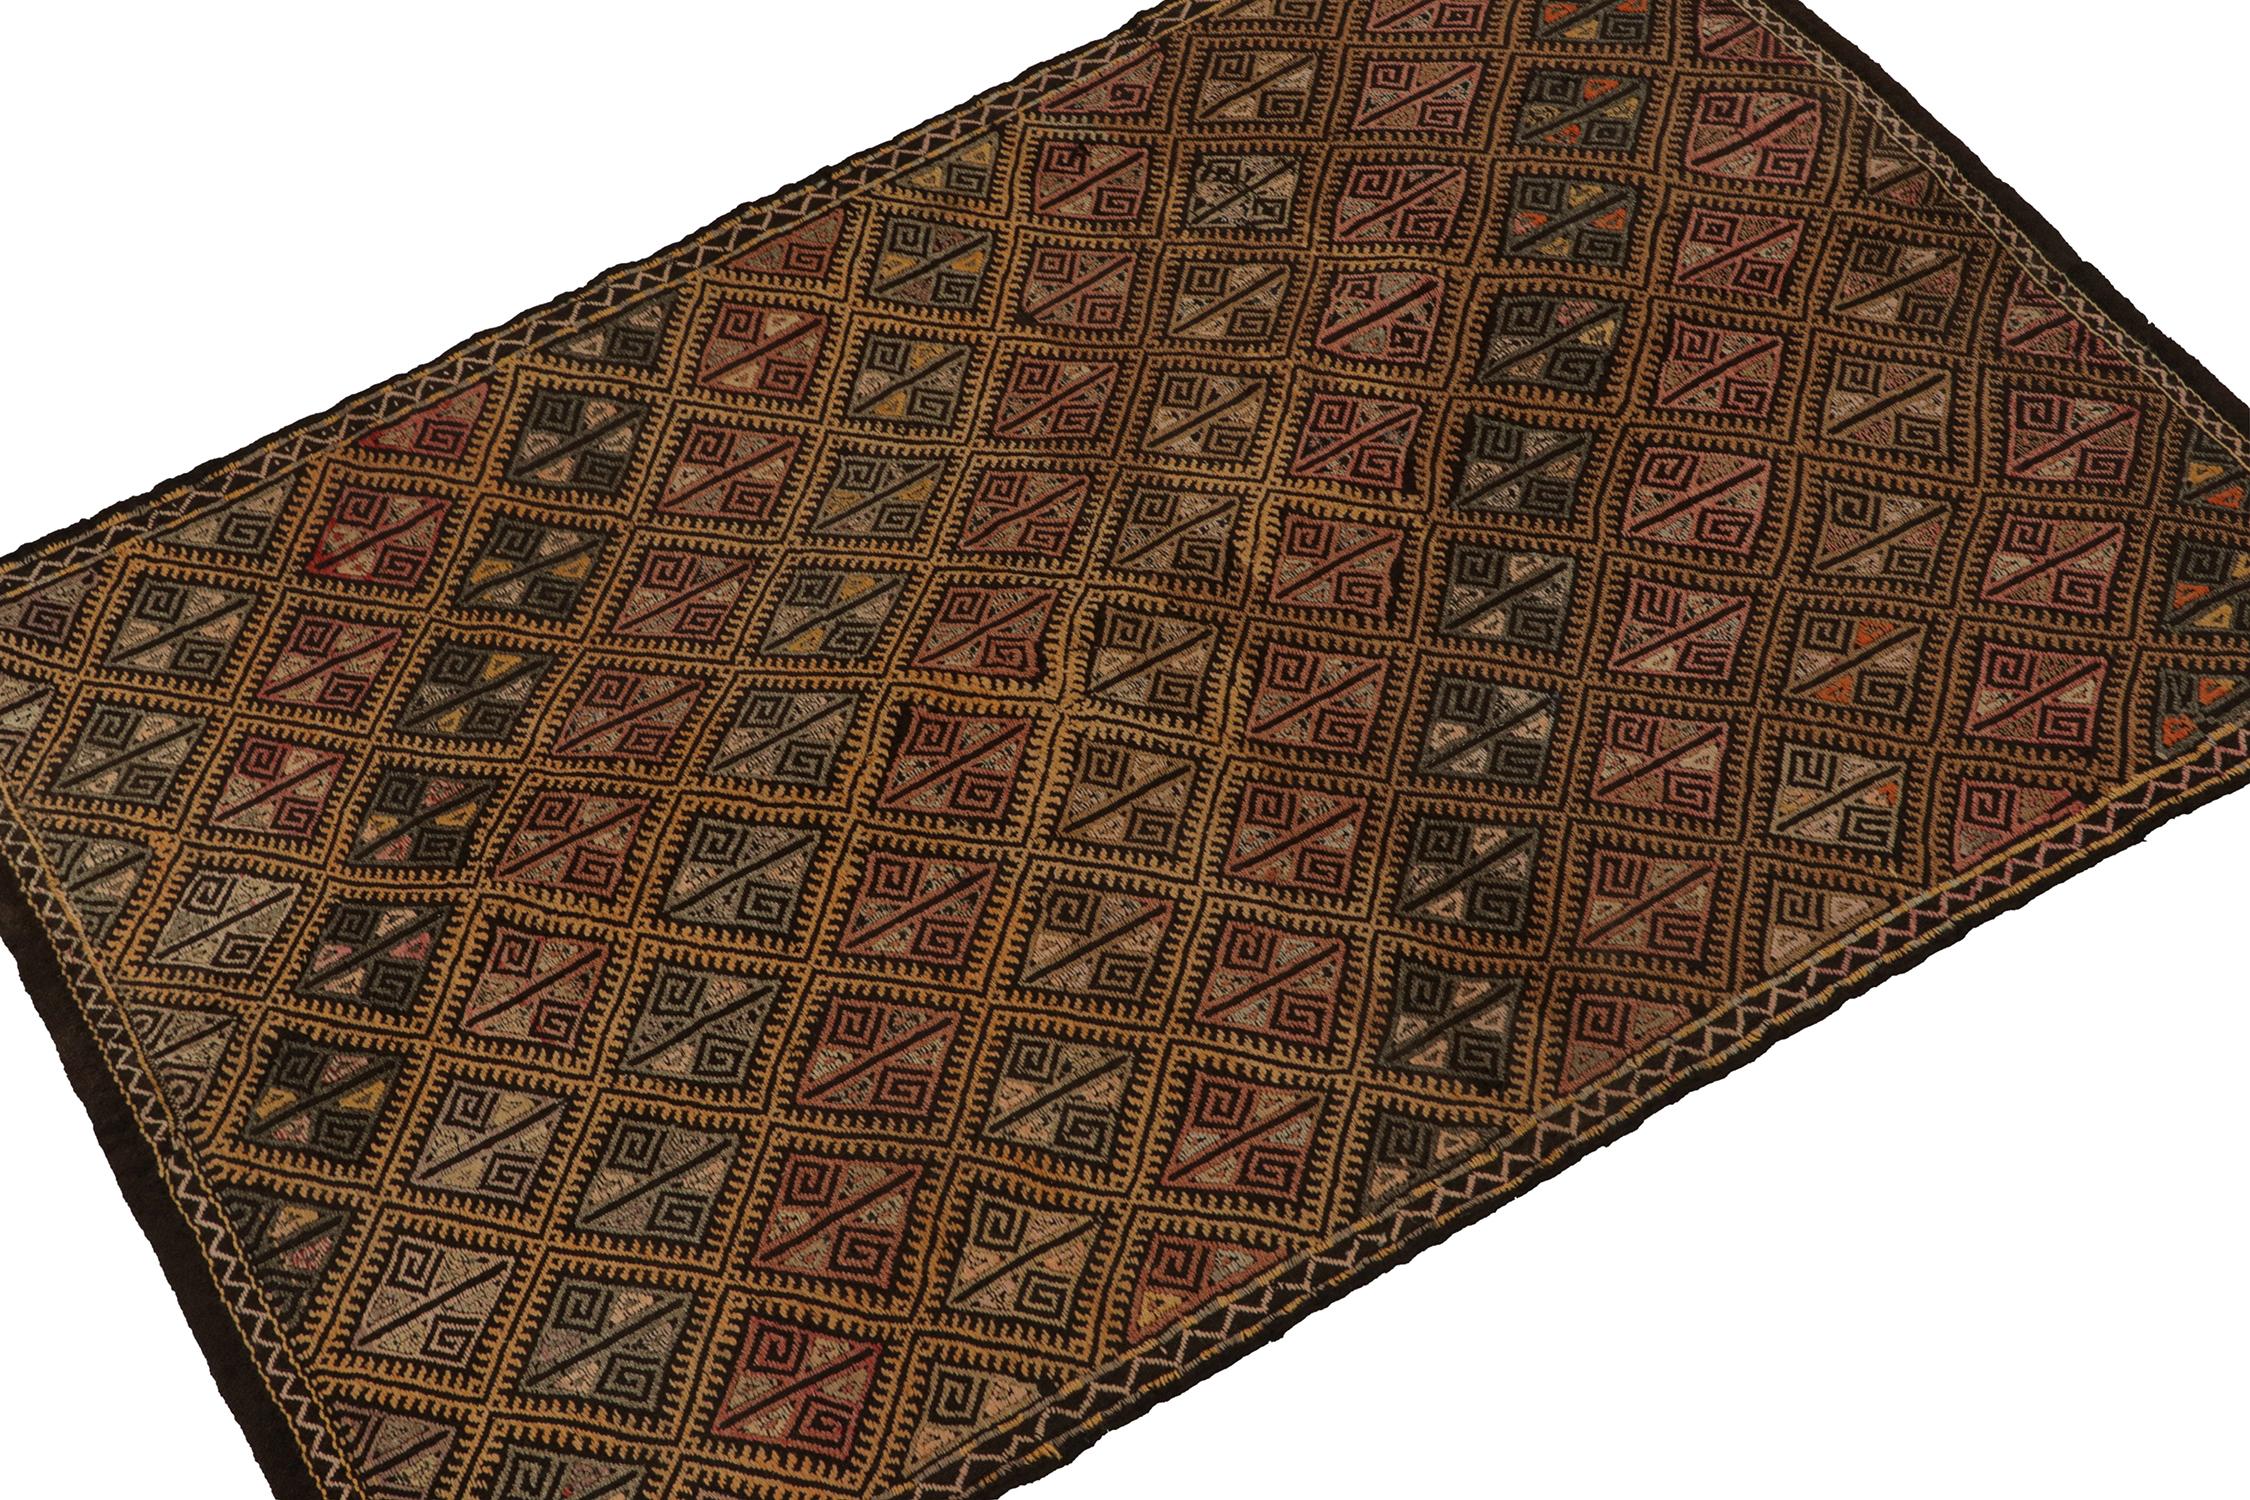 Originating from Turkey circa 1950-1960, a vintage Chaput style kilim rug connoting elaborate tribal sensibilities. Handwoven in wool, the piece exhibits an unusual play of vibrant embroidery atop a rich brown, trending-black background seldom seen